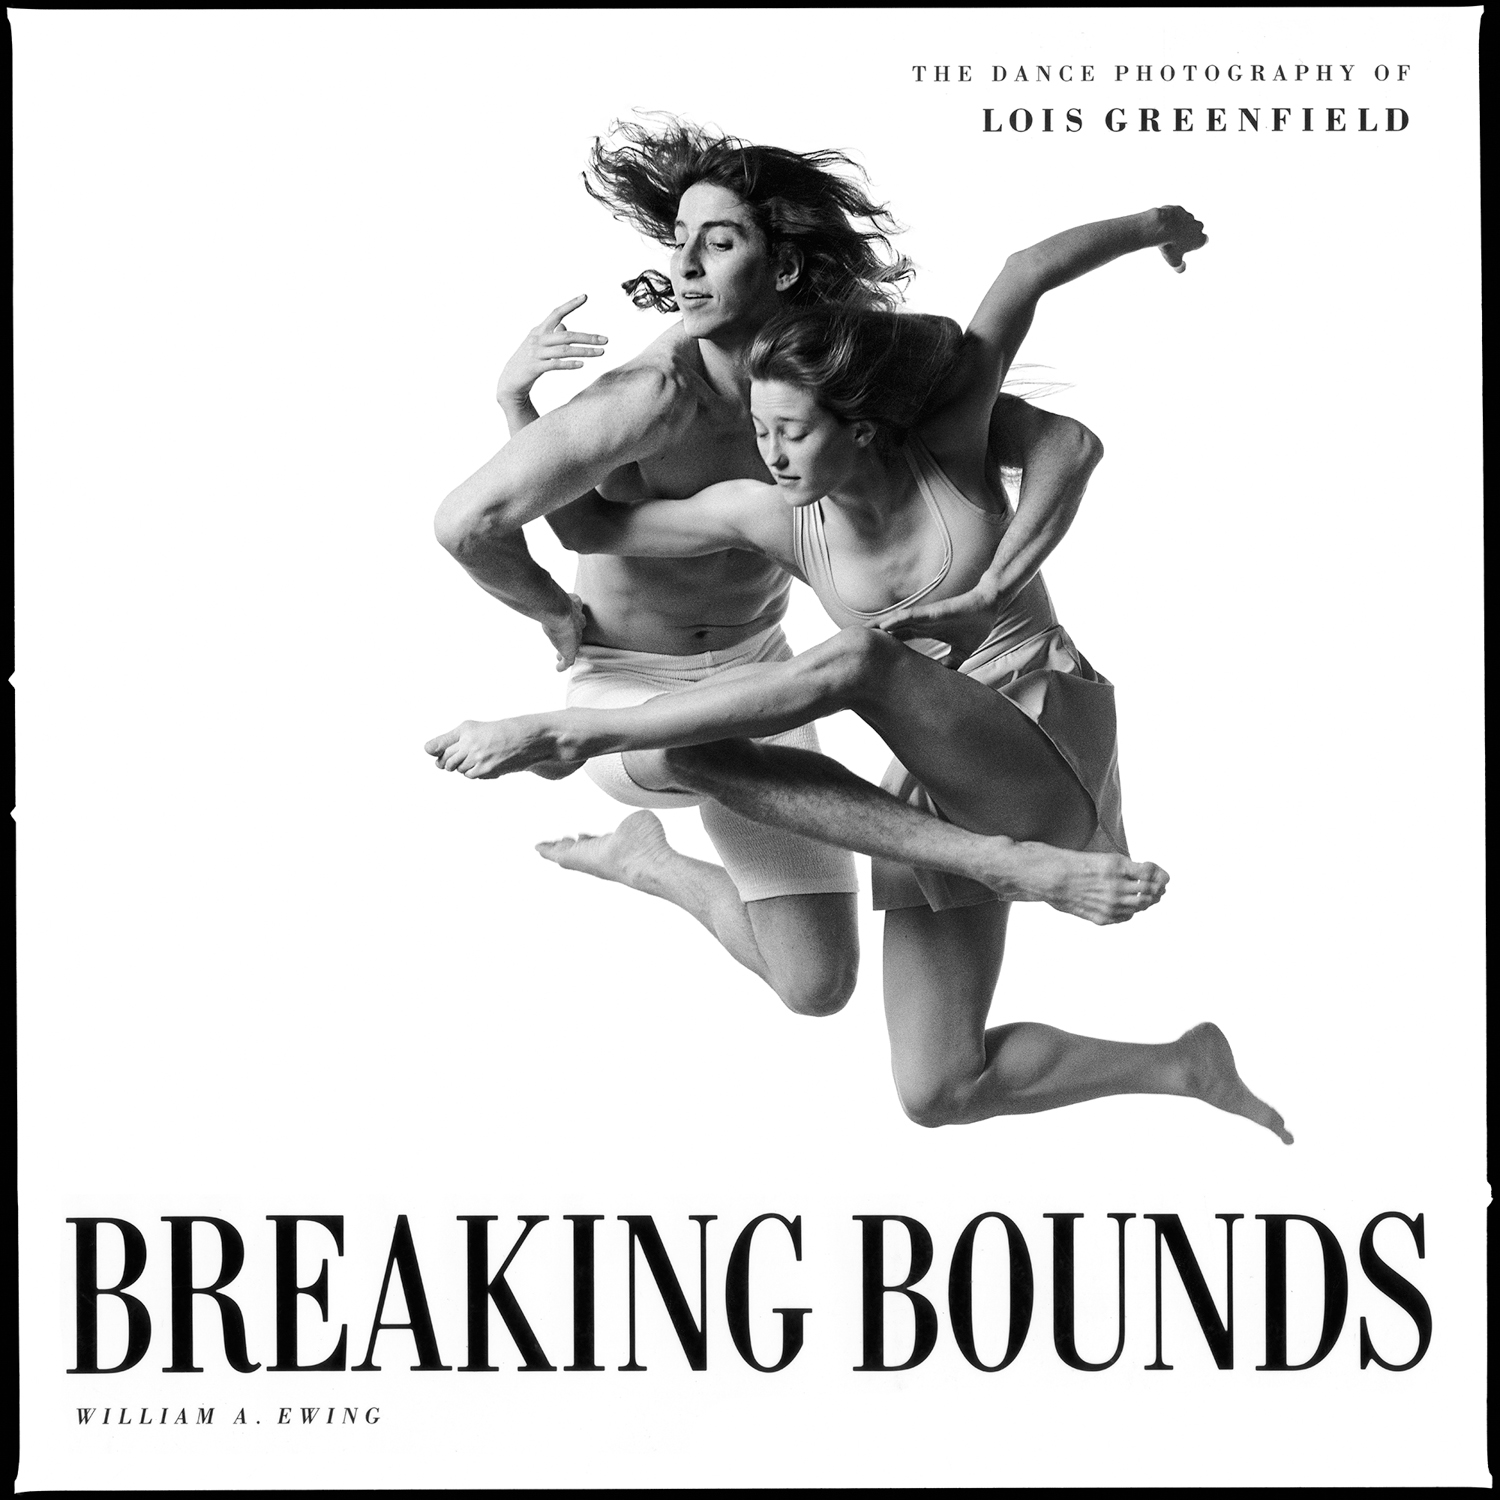   Breaking Bounds  (1992) is Greenfield’s first book, showcasing her groundbreaking images of dance as can never be seen on the stage . Unrestrained by choreography, the dancers in her photographs defy both logic and gravity.   William A. Ewing and L